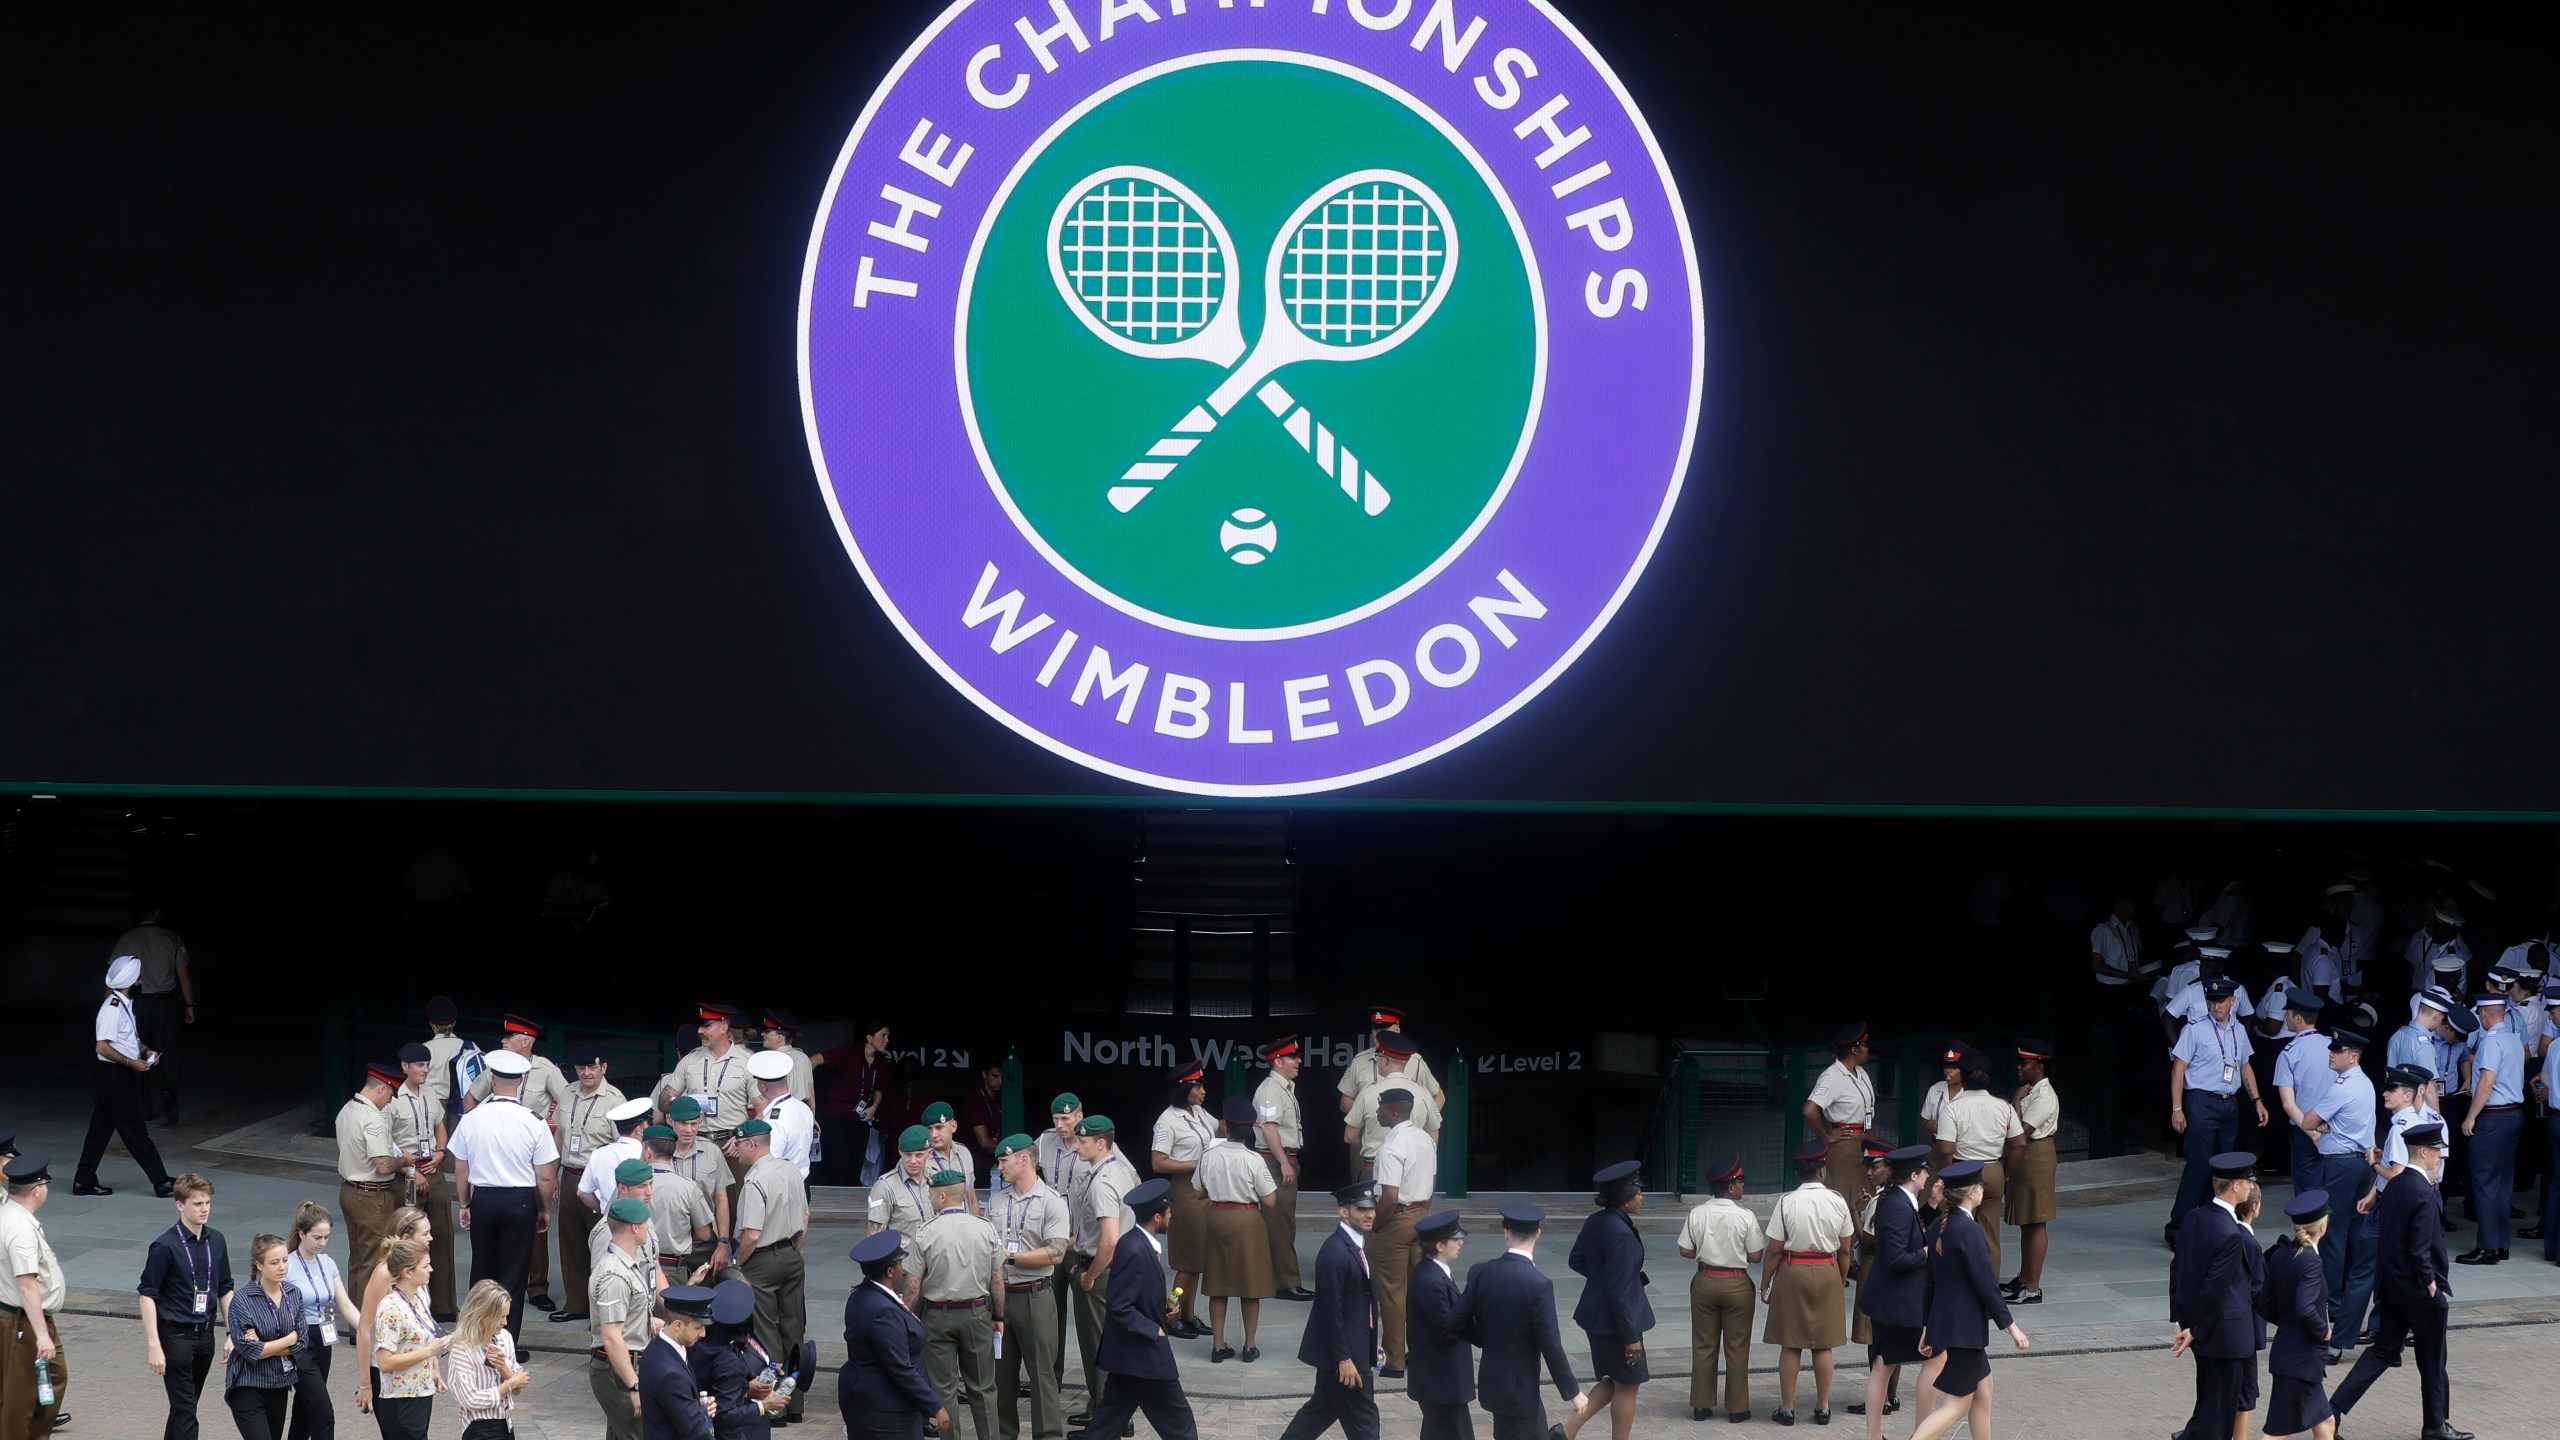 FILE - Stewards prepare for the start of the Wimbledon Tennis Championships in London, Sunday, June 30, 2019. This year's Wimbledon tournament begins on Monday, July 1.(AP Photo/Kirsty Wigglesworth, File)